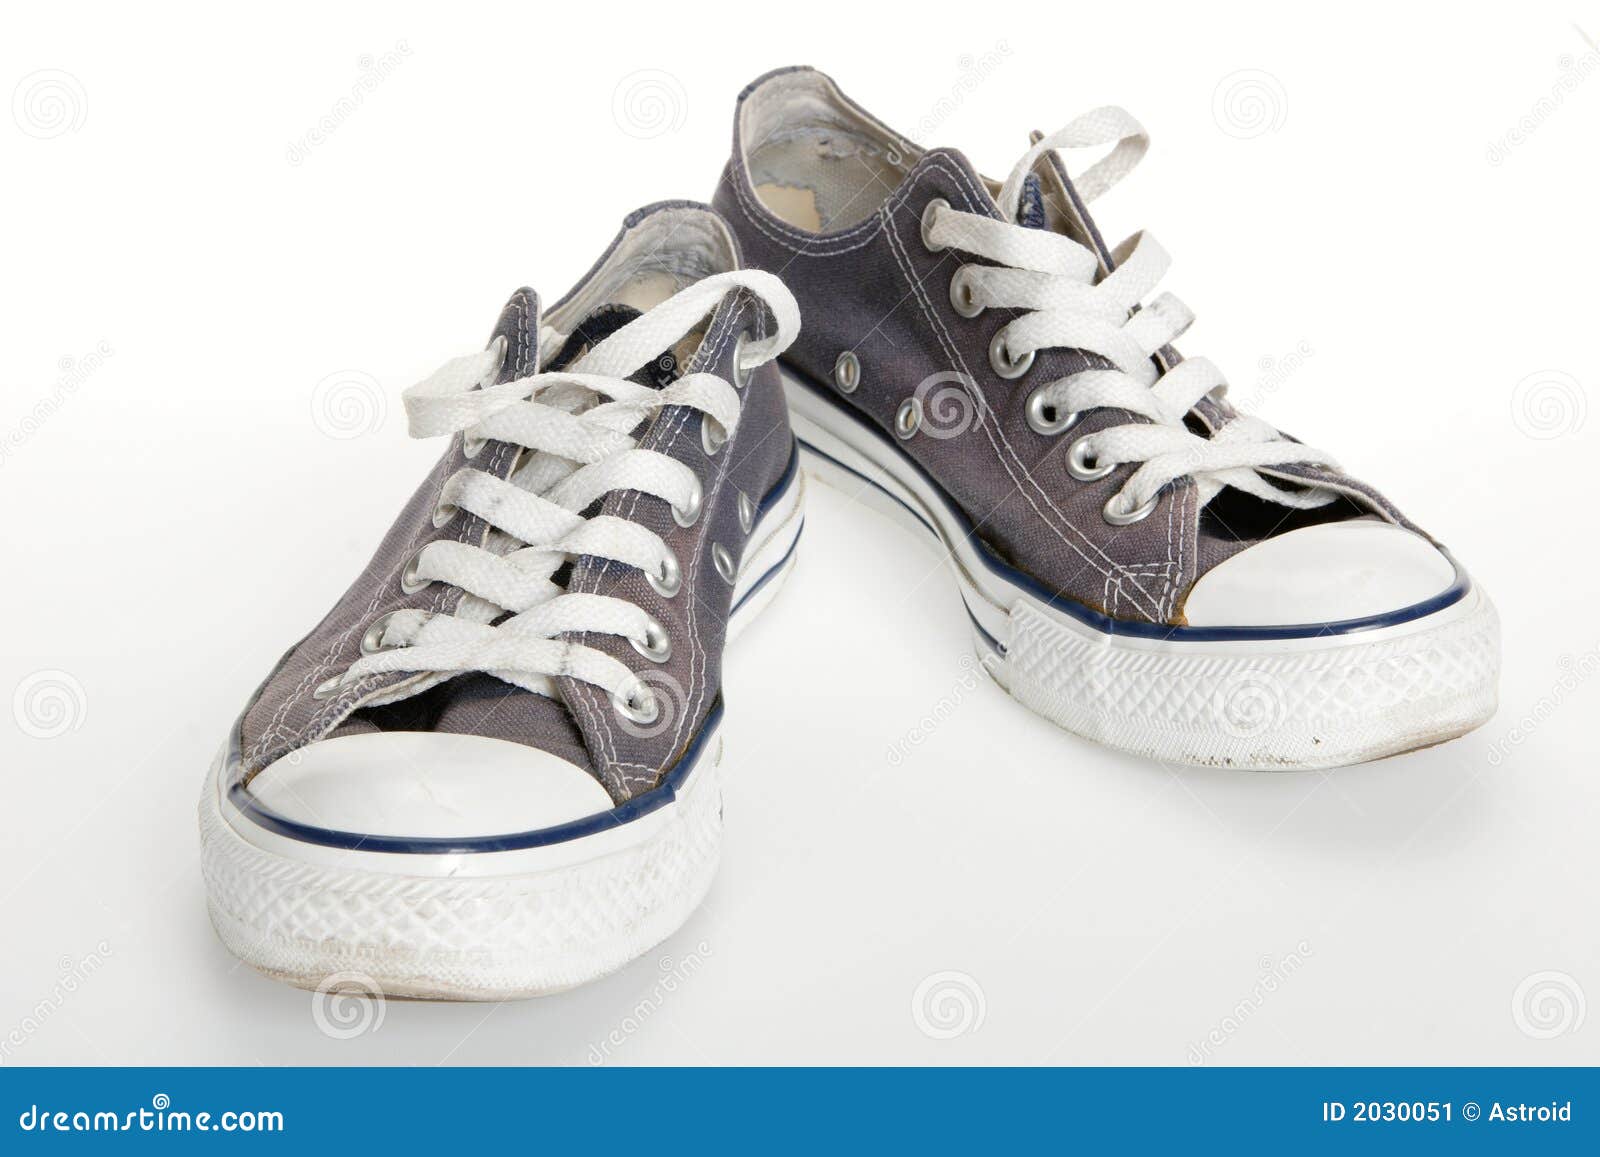 Atheletic Footwear stock image. Image of walks, lace, quality - 2030051